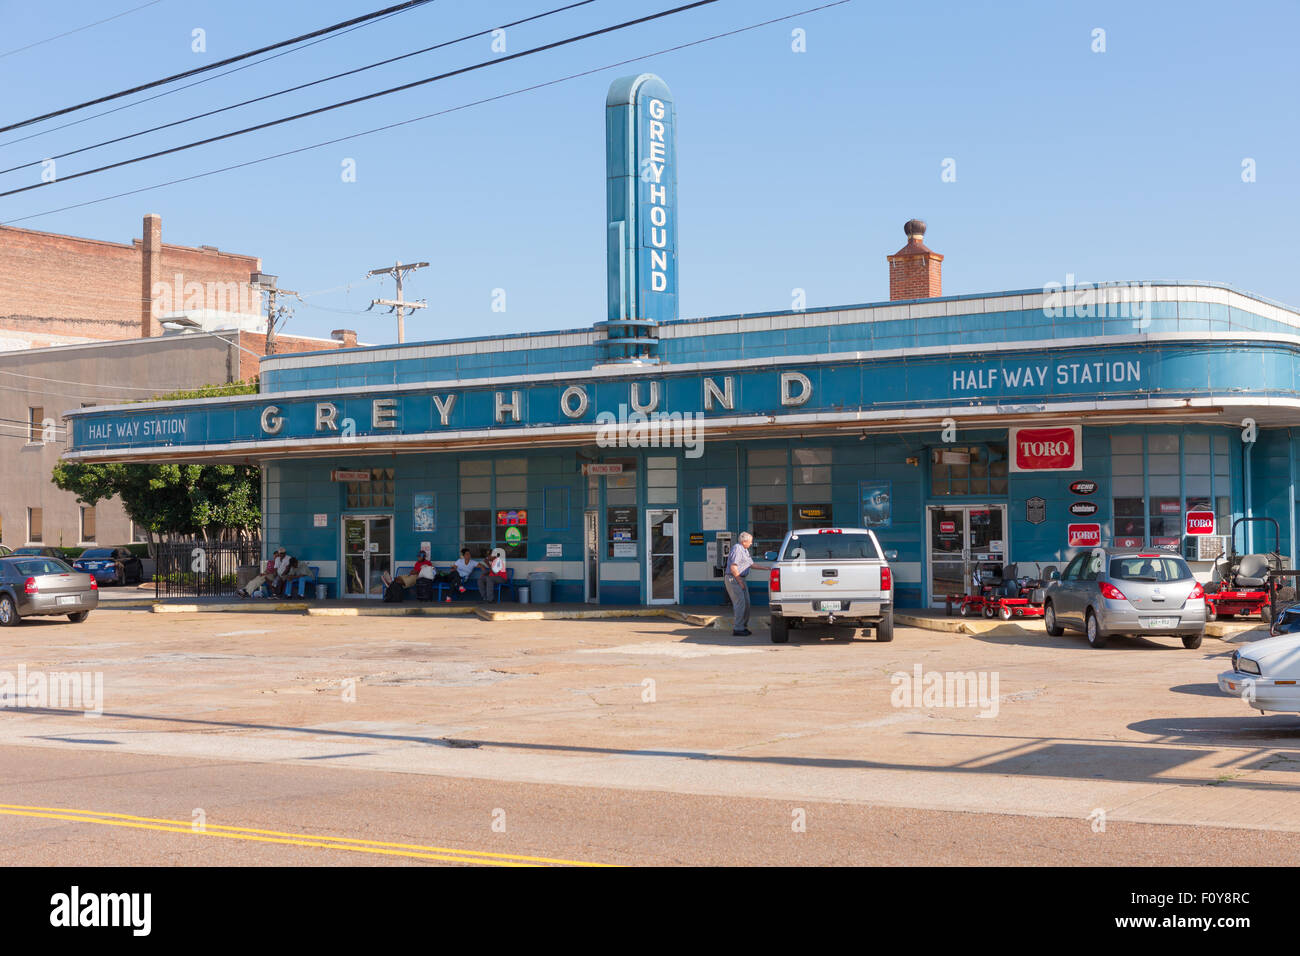 Passengers wait for their bus at the historic Greyhound Bus Station in Jackson, Tennessee. Stock Photo